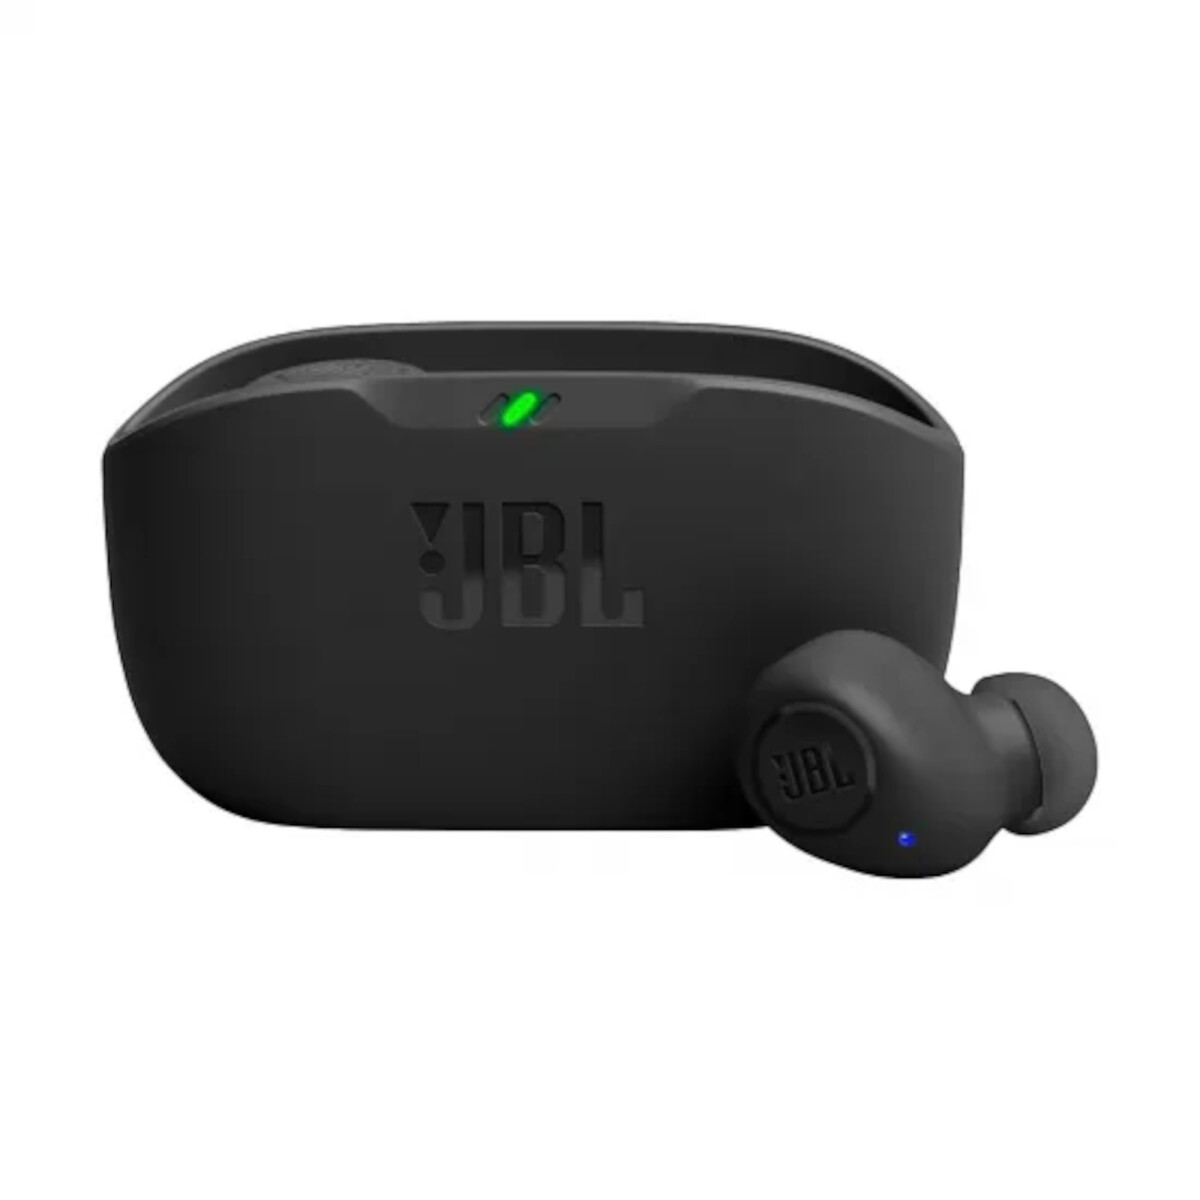 Jbl - Auriculares Inalámbricos Wave Buds - IP54/IPX2. Bluetooth. Tw. 8MM. Negro. - 001 